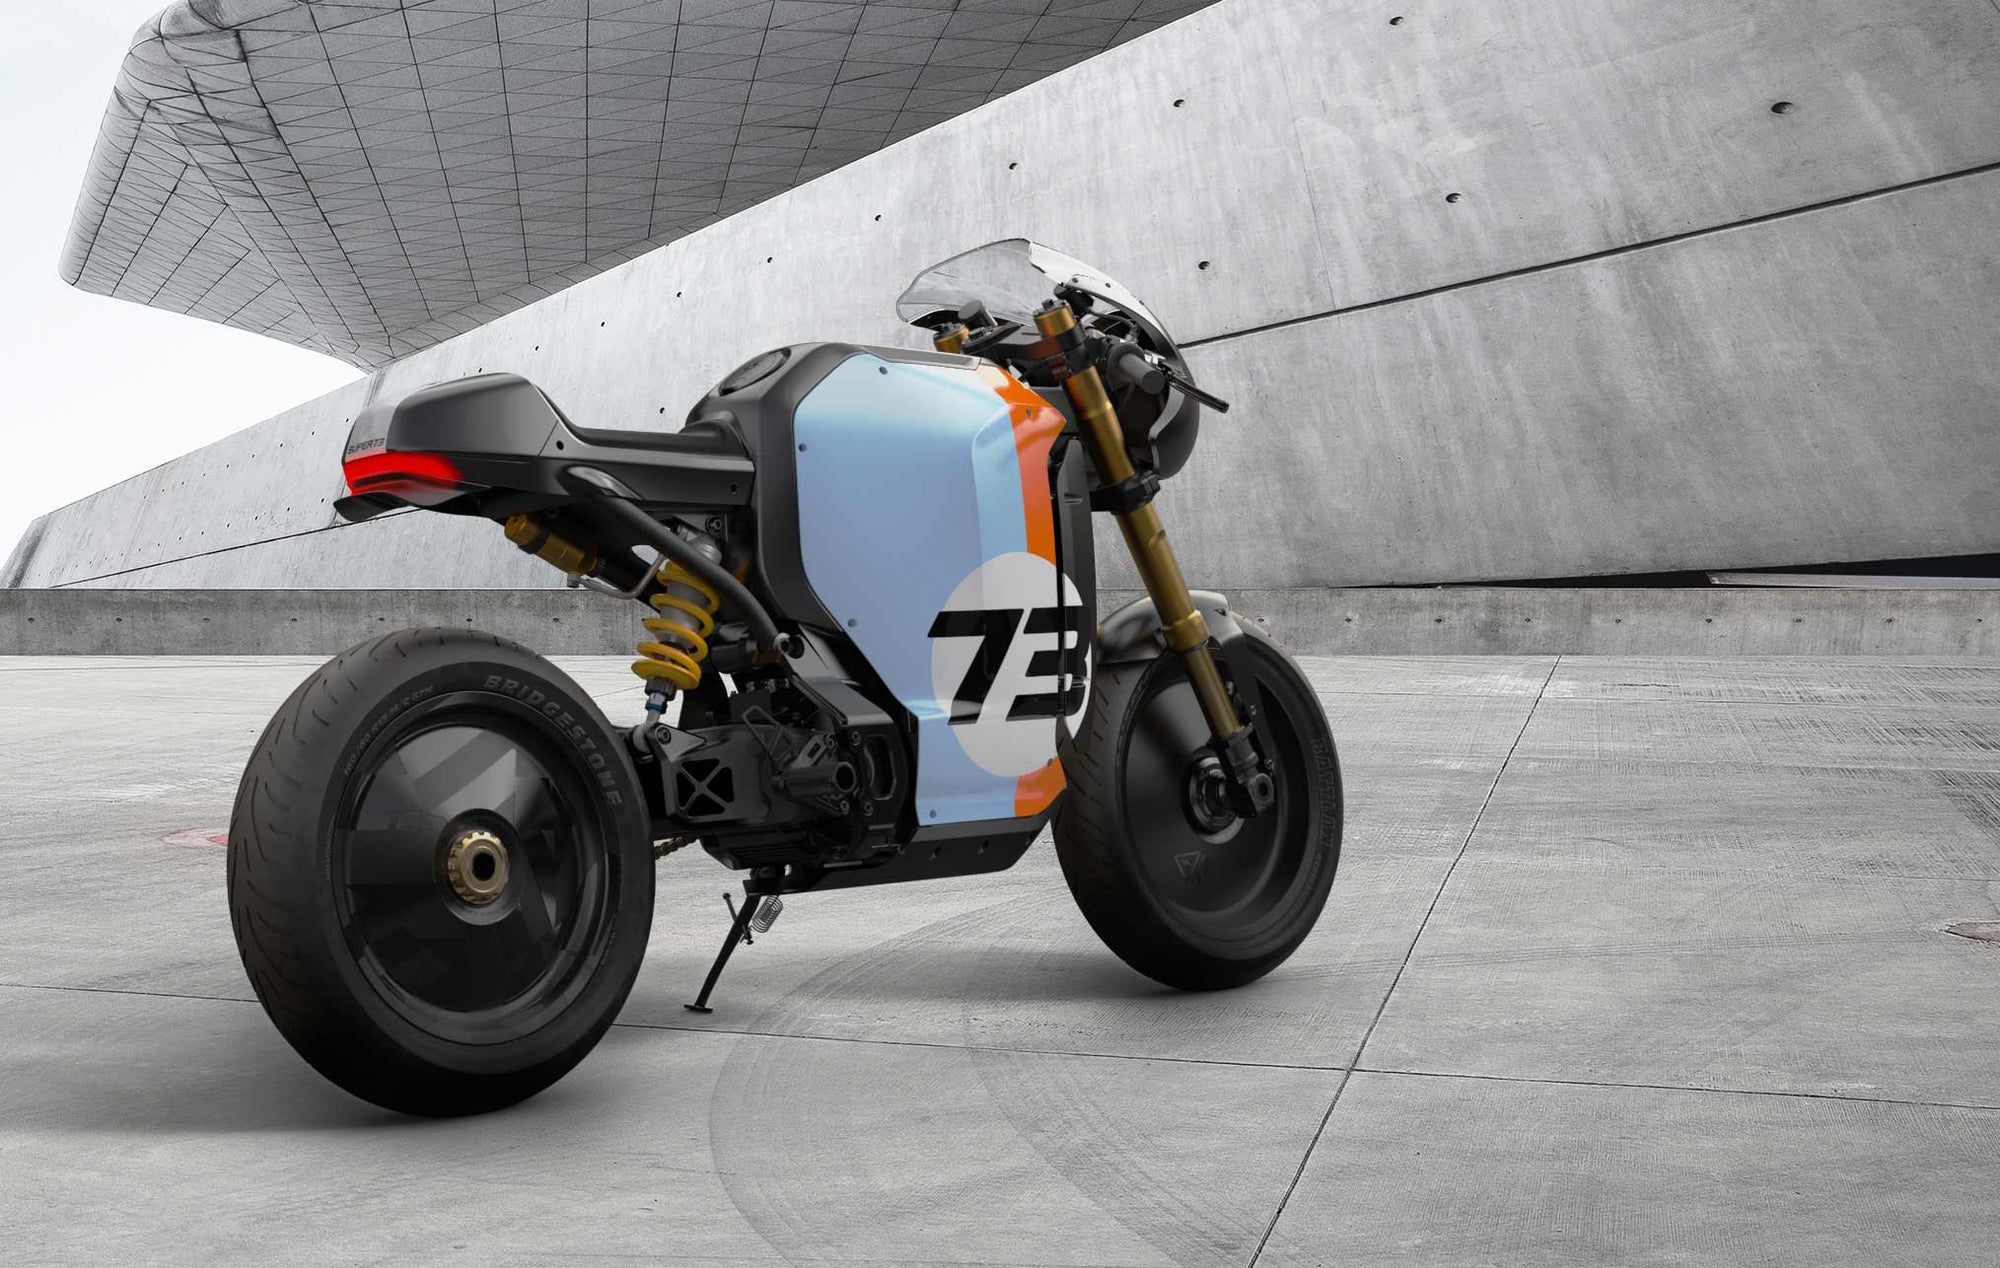 Lifestyle image with side and rear view of the Super Le Pew “Café” Super Sport C1X bike